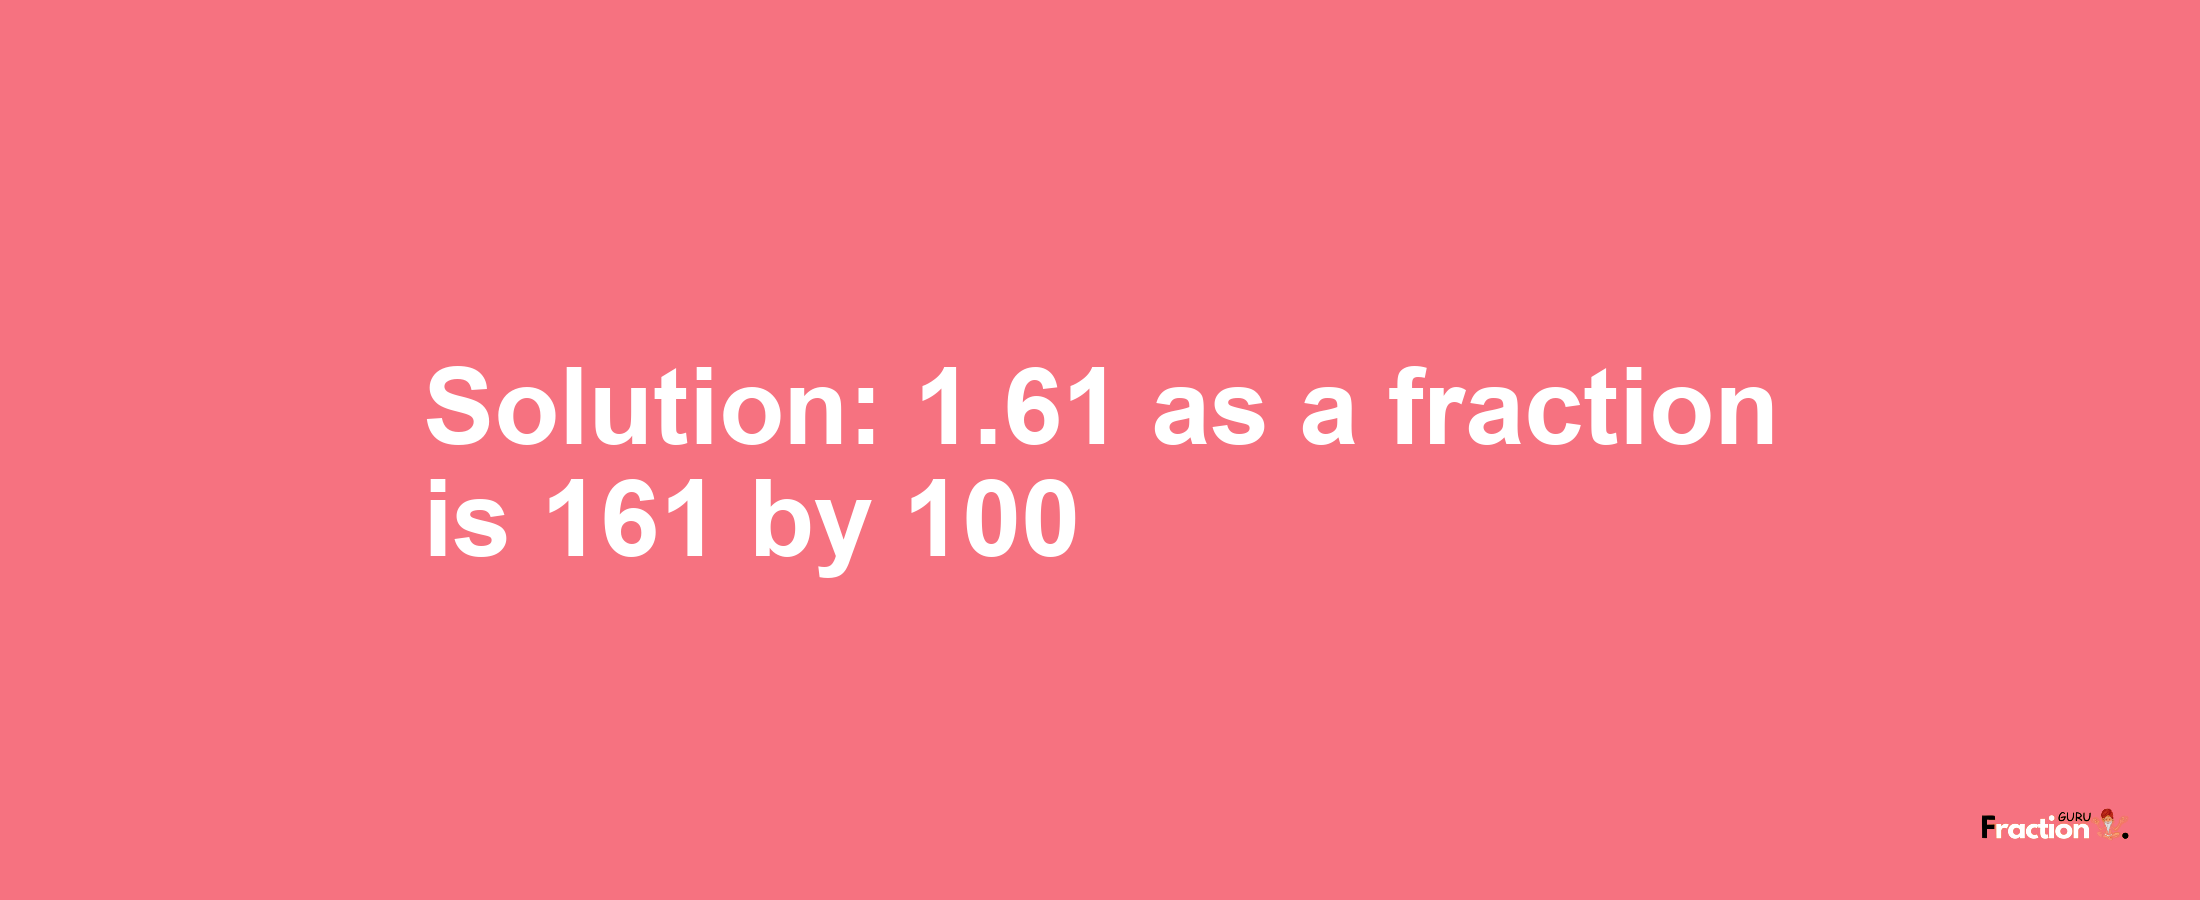 Solution:1.61 as a fraction is 161/100